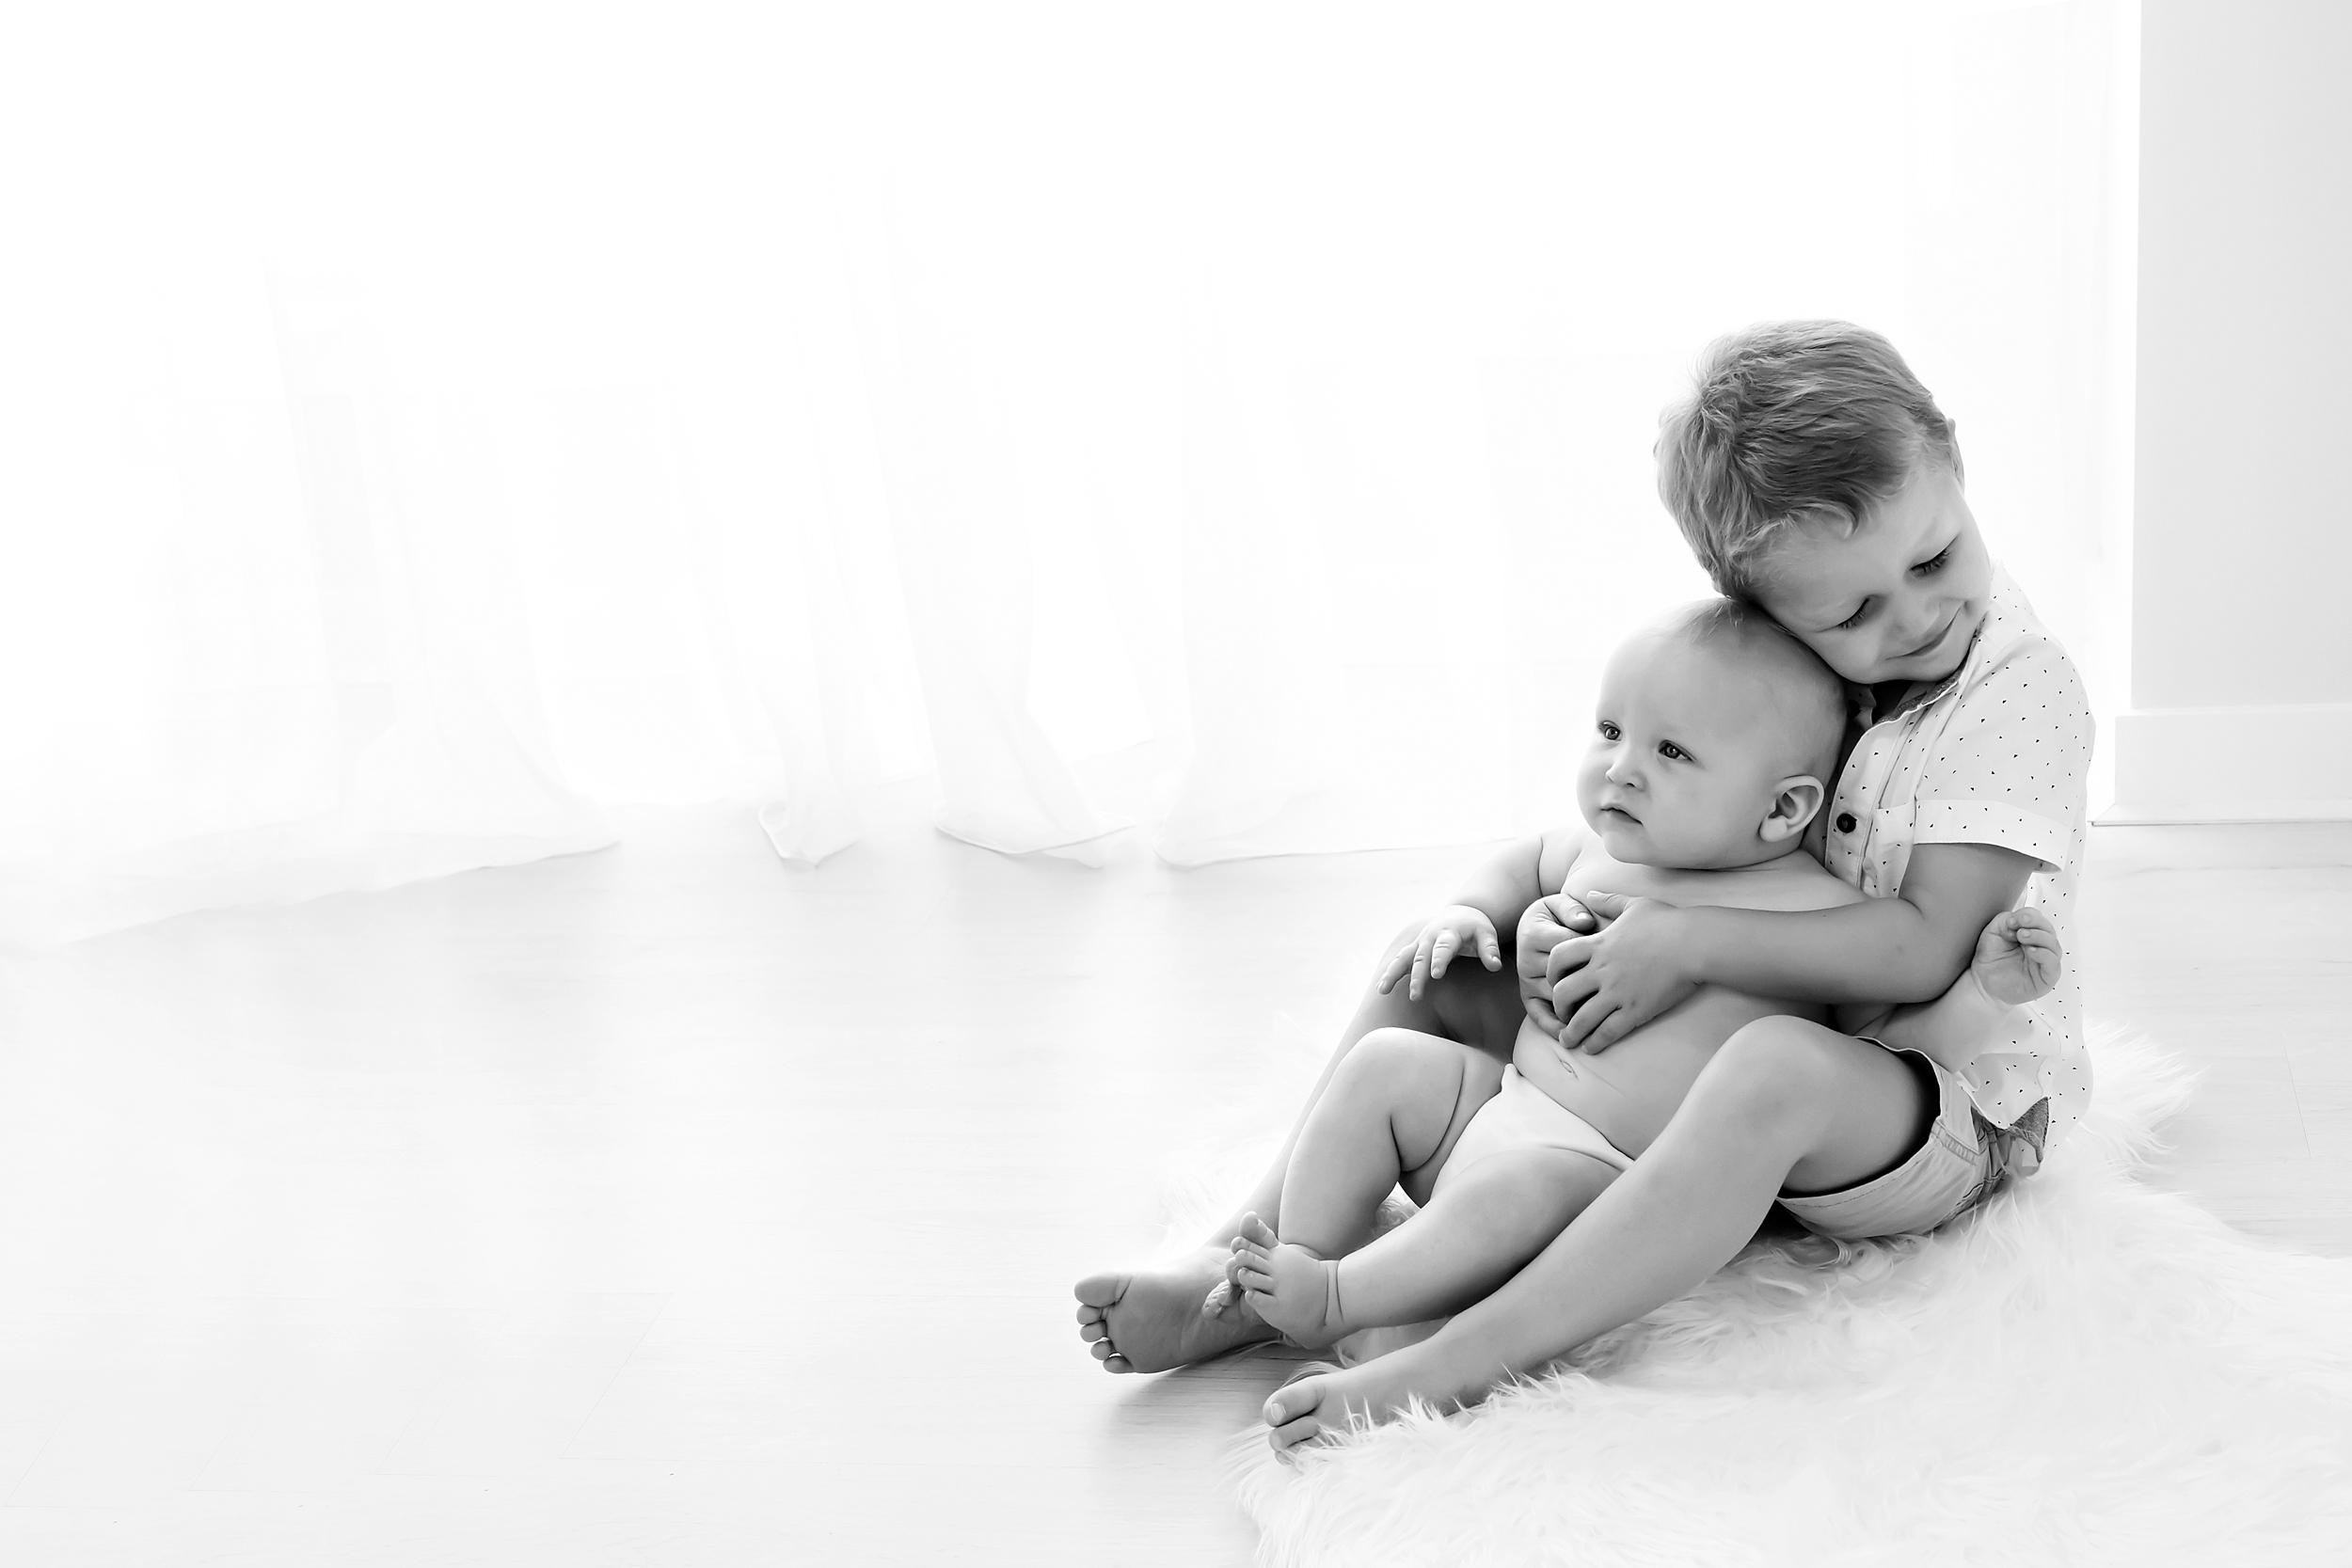 Black and white photo of older brother cuddling younger brother taken during baby photo session in Melbourne